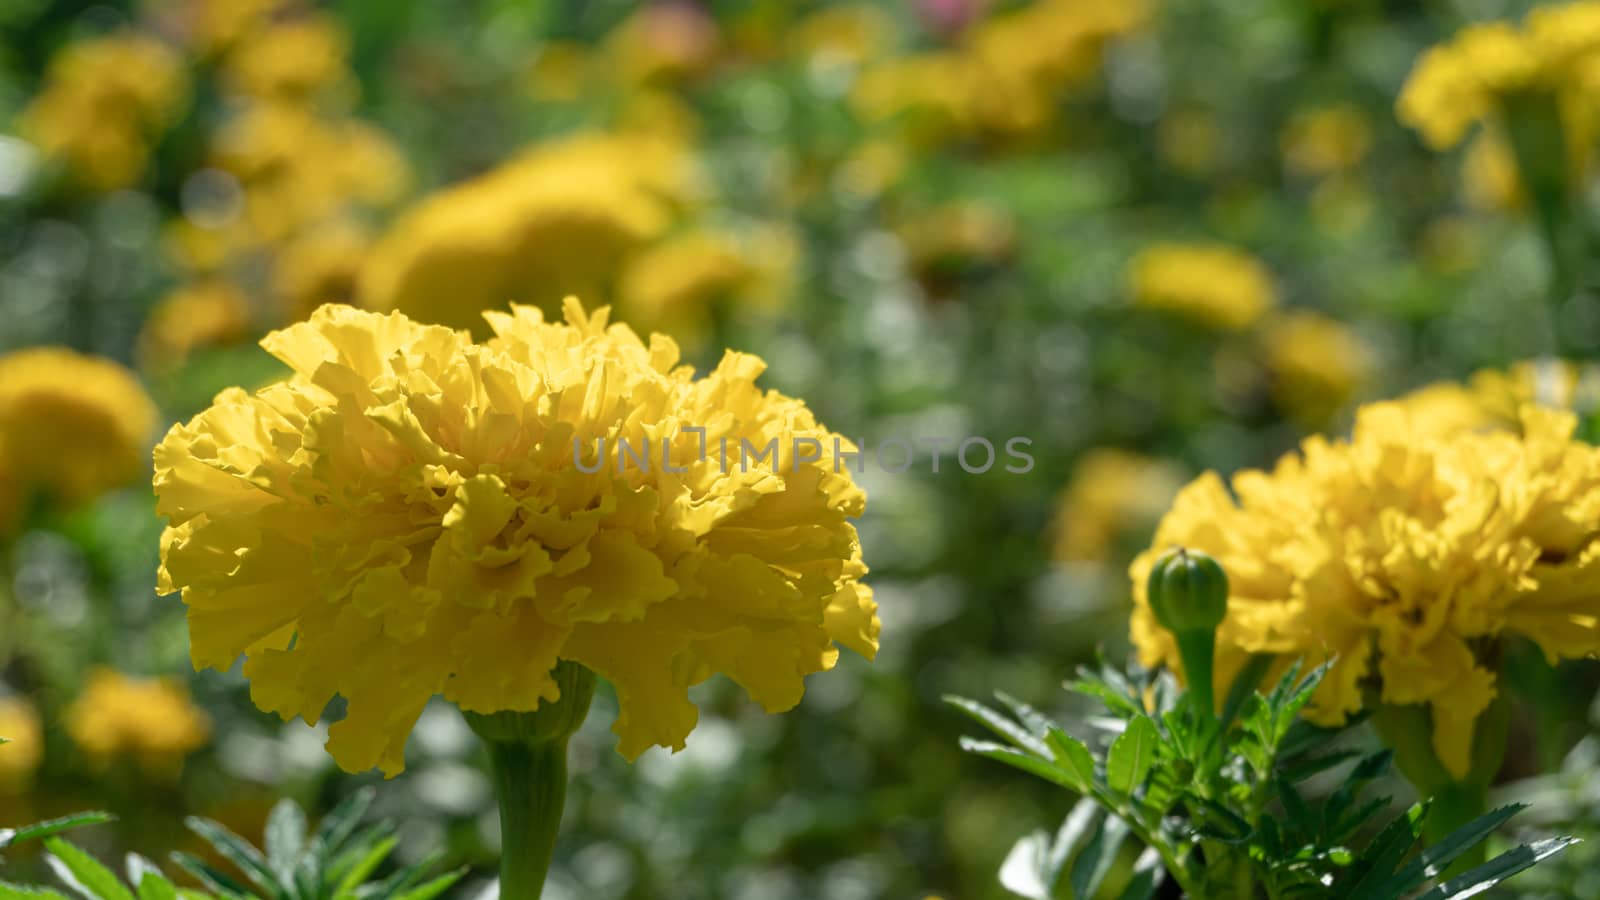 Marigold flower (Tagetes erecta, Mexican, Aztec or African marigold) in the garden.